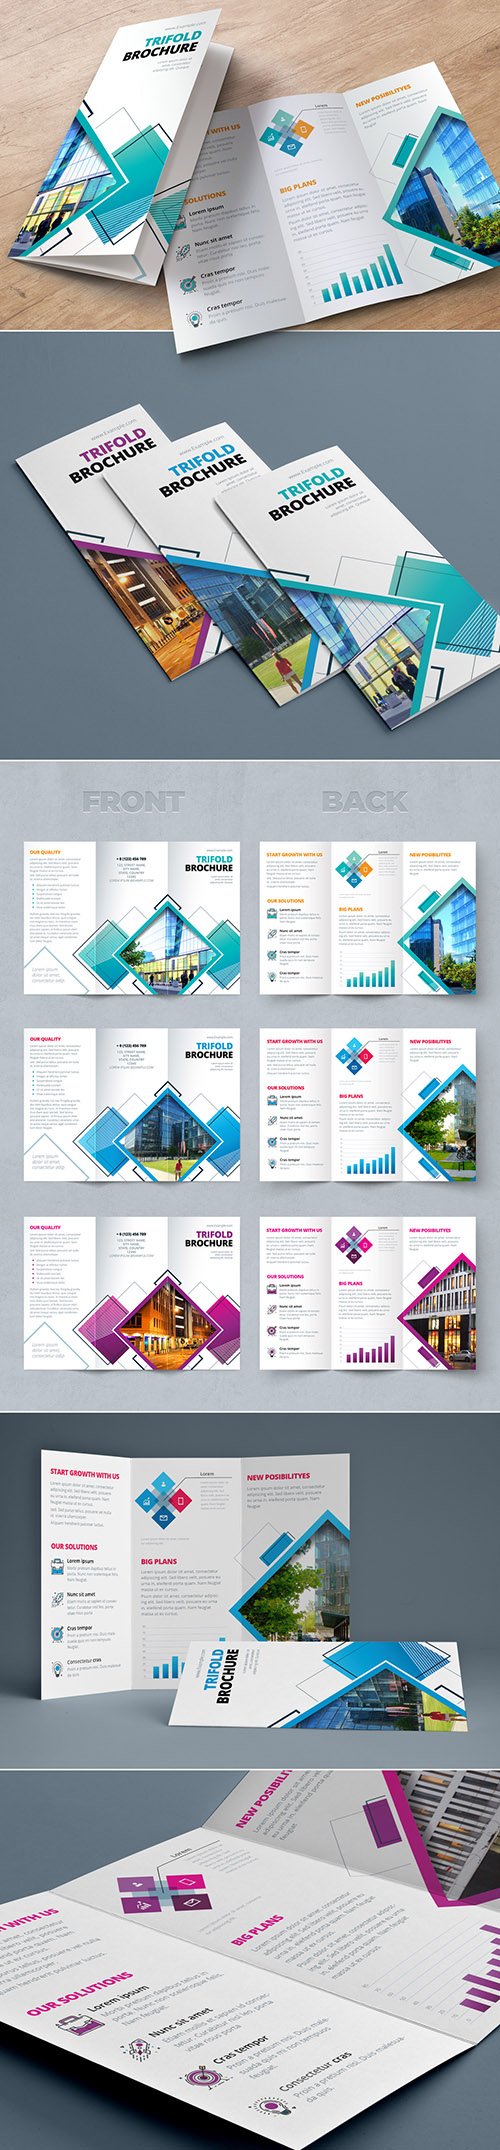 Trifold Brochure Layout with Geometric Elements